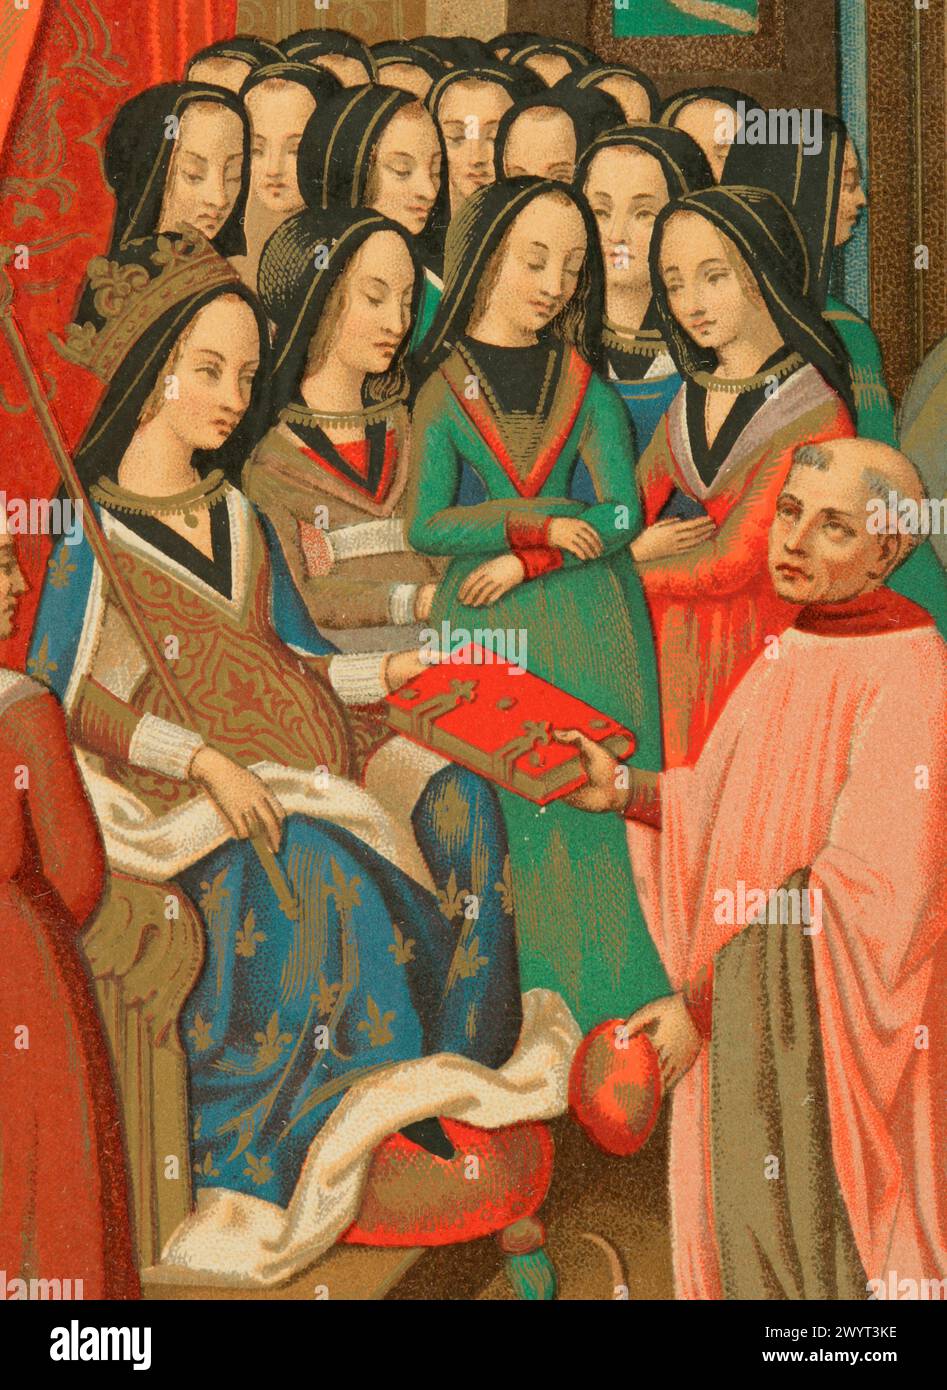 Marie of Anjou (1404-1463). Queen consort of France (1422-1461). The Court of Ladies of Marie of Anjou, wife of Charles VII. His chaplain, the scholar Robert Blondel, presents to her the allegorical treatise of the “Twelve Perils of Hell” which he composed for her, 1455. Chromolithography from a miniature of that book. Detail. 'Moeurs, usages et costumes au moyen-âge et à l'époque de la Renaissance', by Paul Lacroix. Paris, 1878. Stock Photo